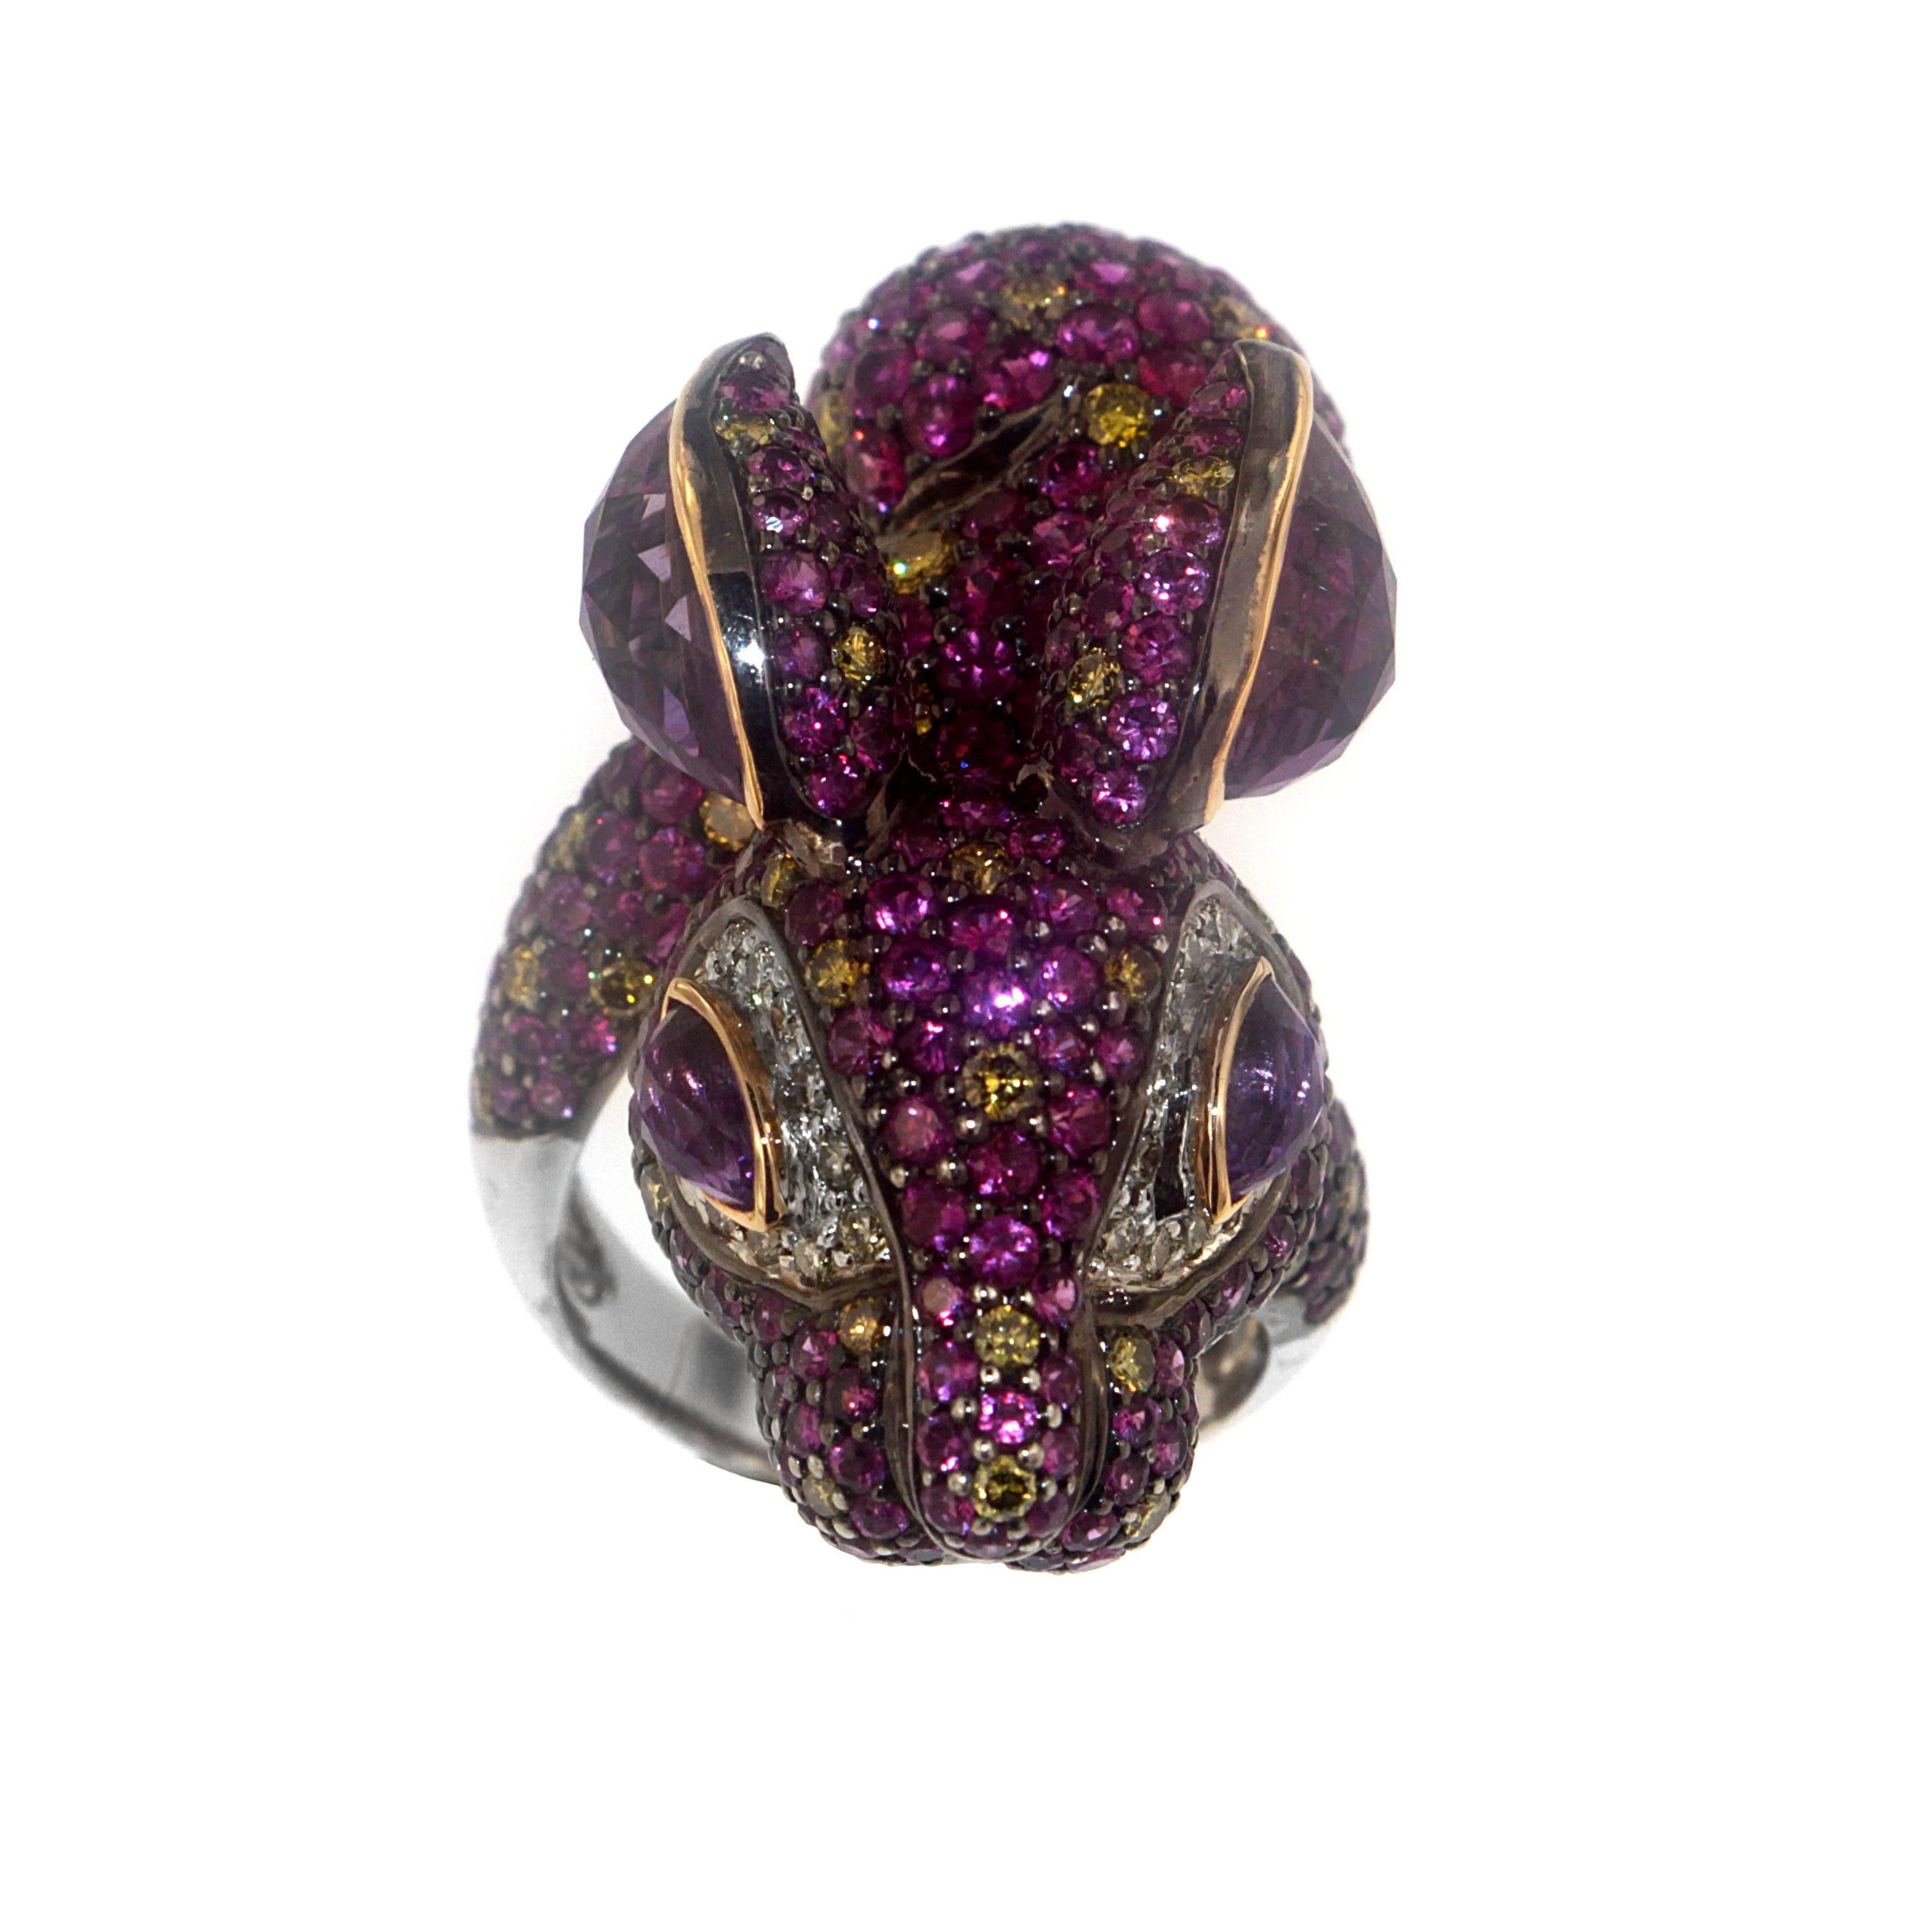 It's a celebration of life! Put a spring in your step and step out in Zorab's 4.52 Carat Amethyst Quartz, 7.00 Pink Sapphire, 0.41 Fancy Diamond and 1.49 Carat Yellow Diamond Bunny Cocktail Rings set on 18 Karat Gold and Palladium. 

This item has a